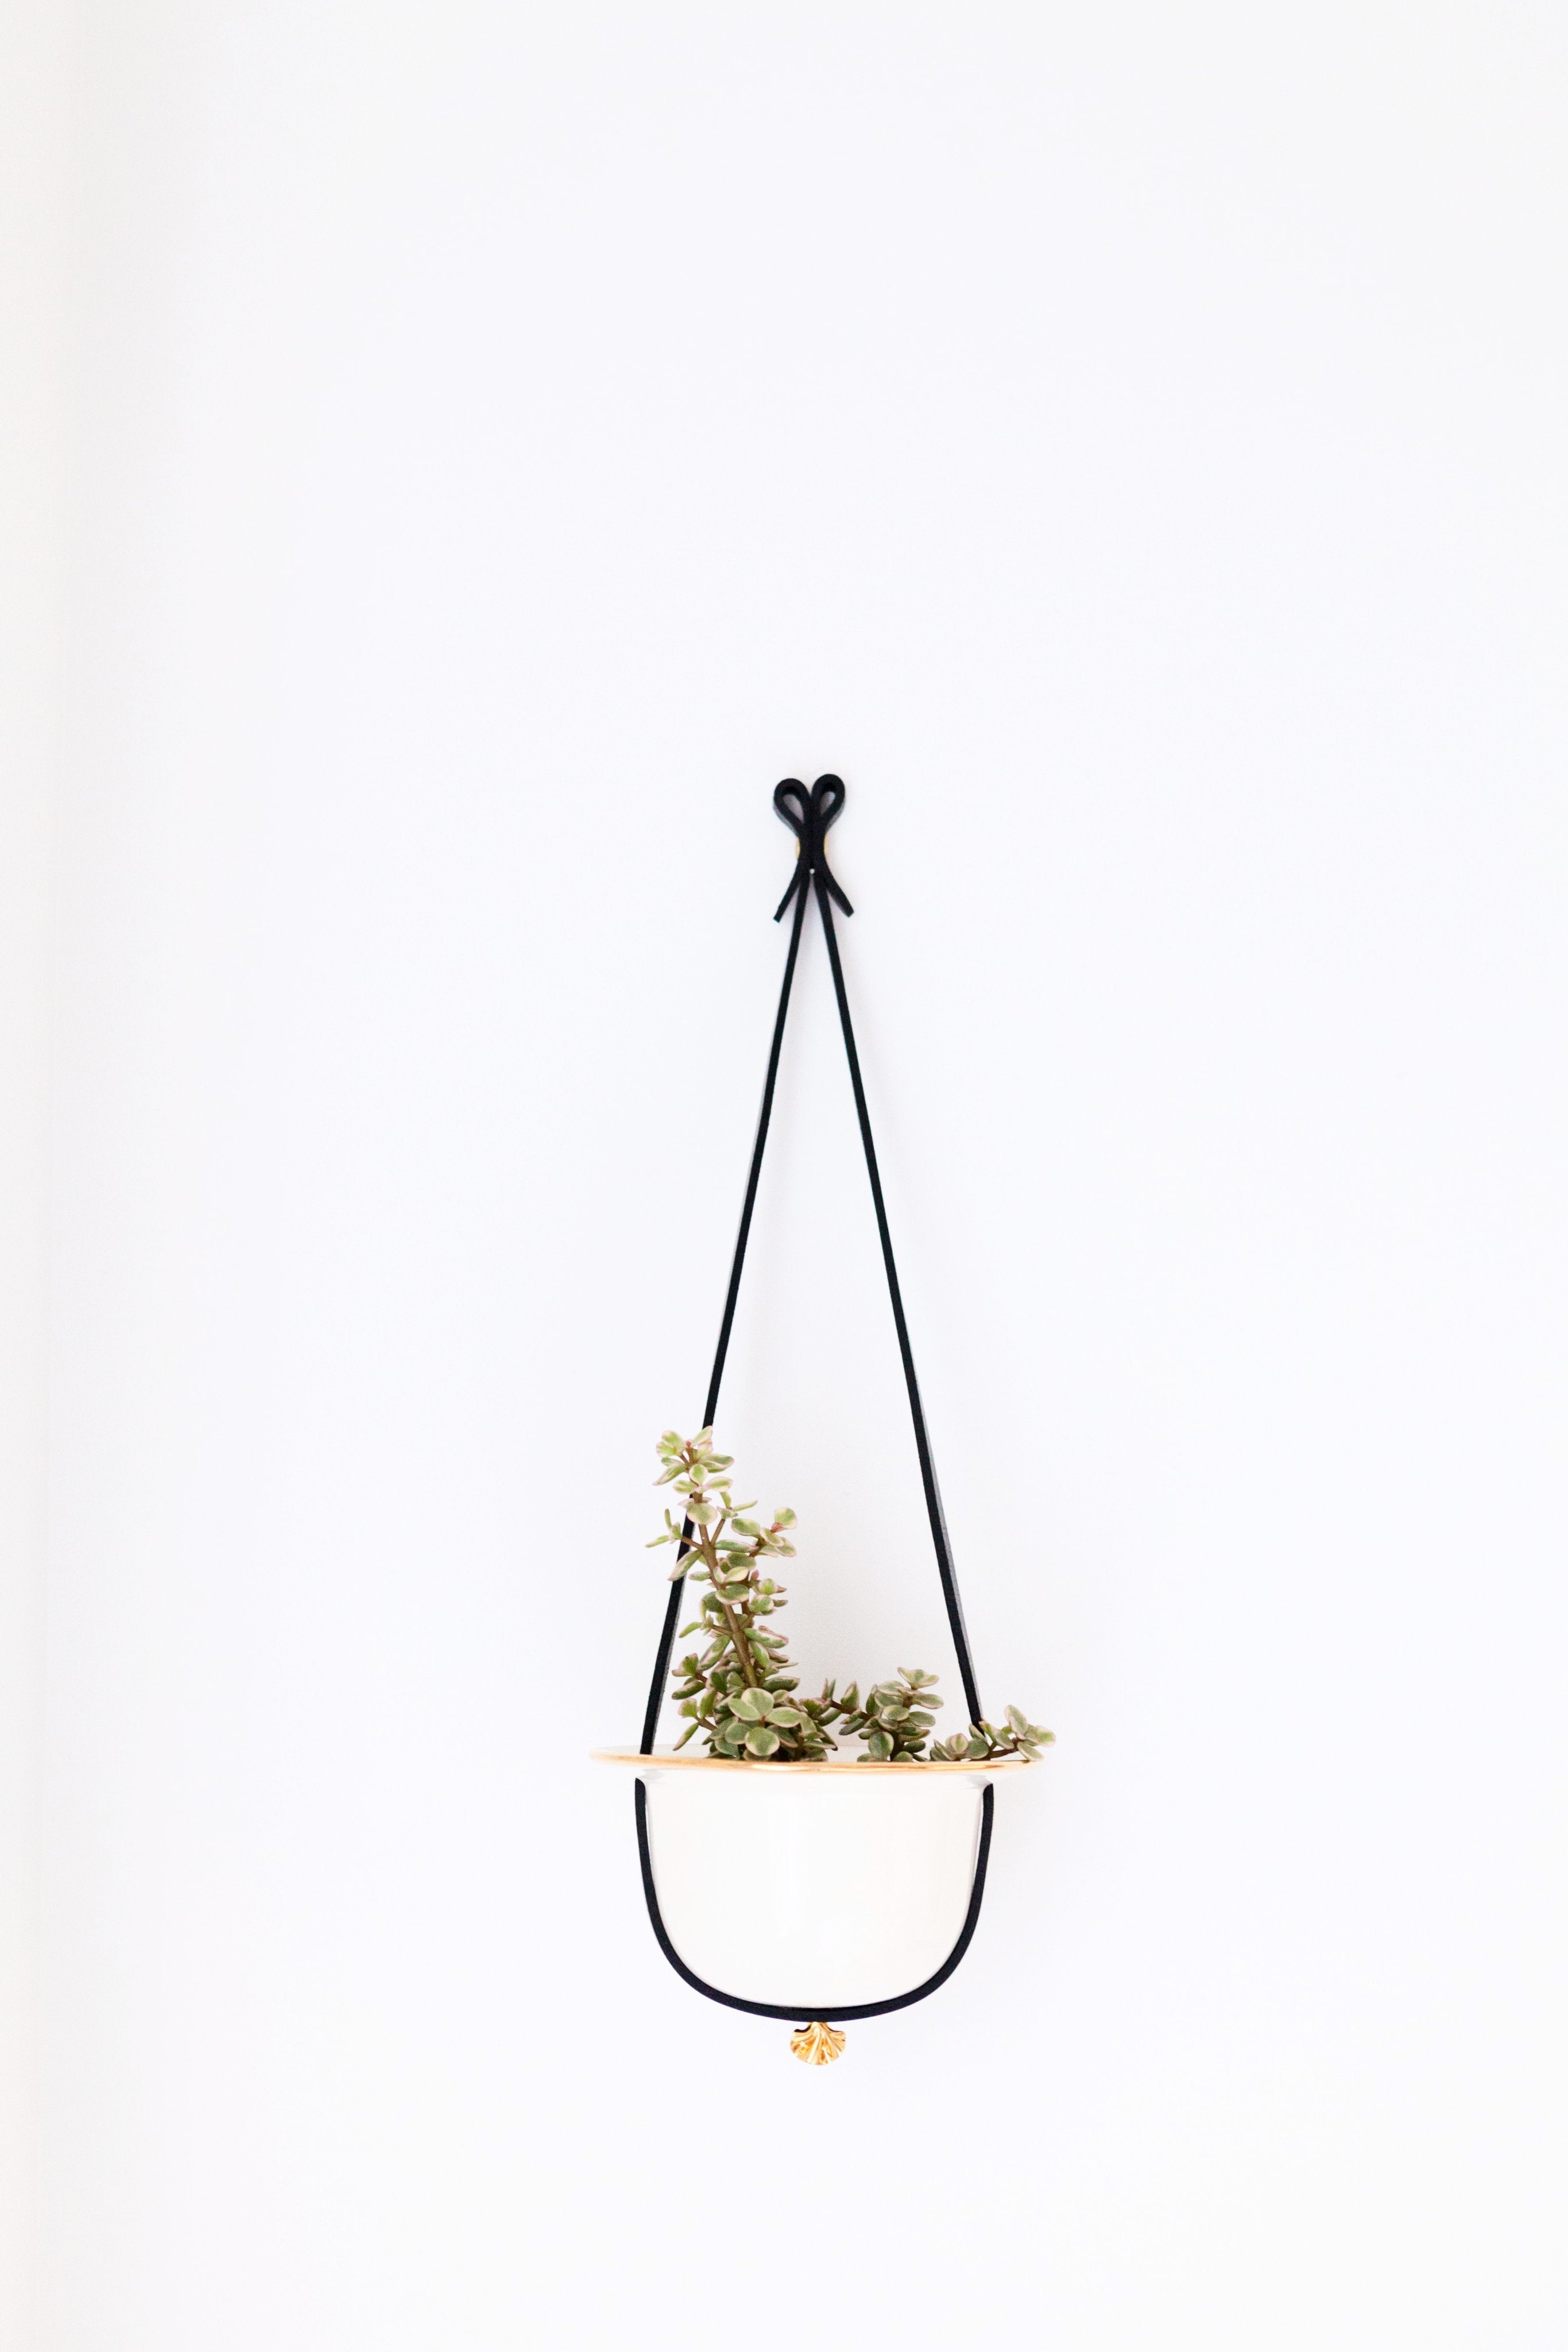 small ceramic and leather planter handmade plant hanger by FLECHR X Goye artiste ceramiste made by hand in Montreal Qc